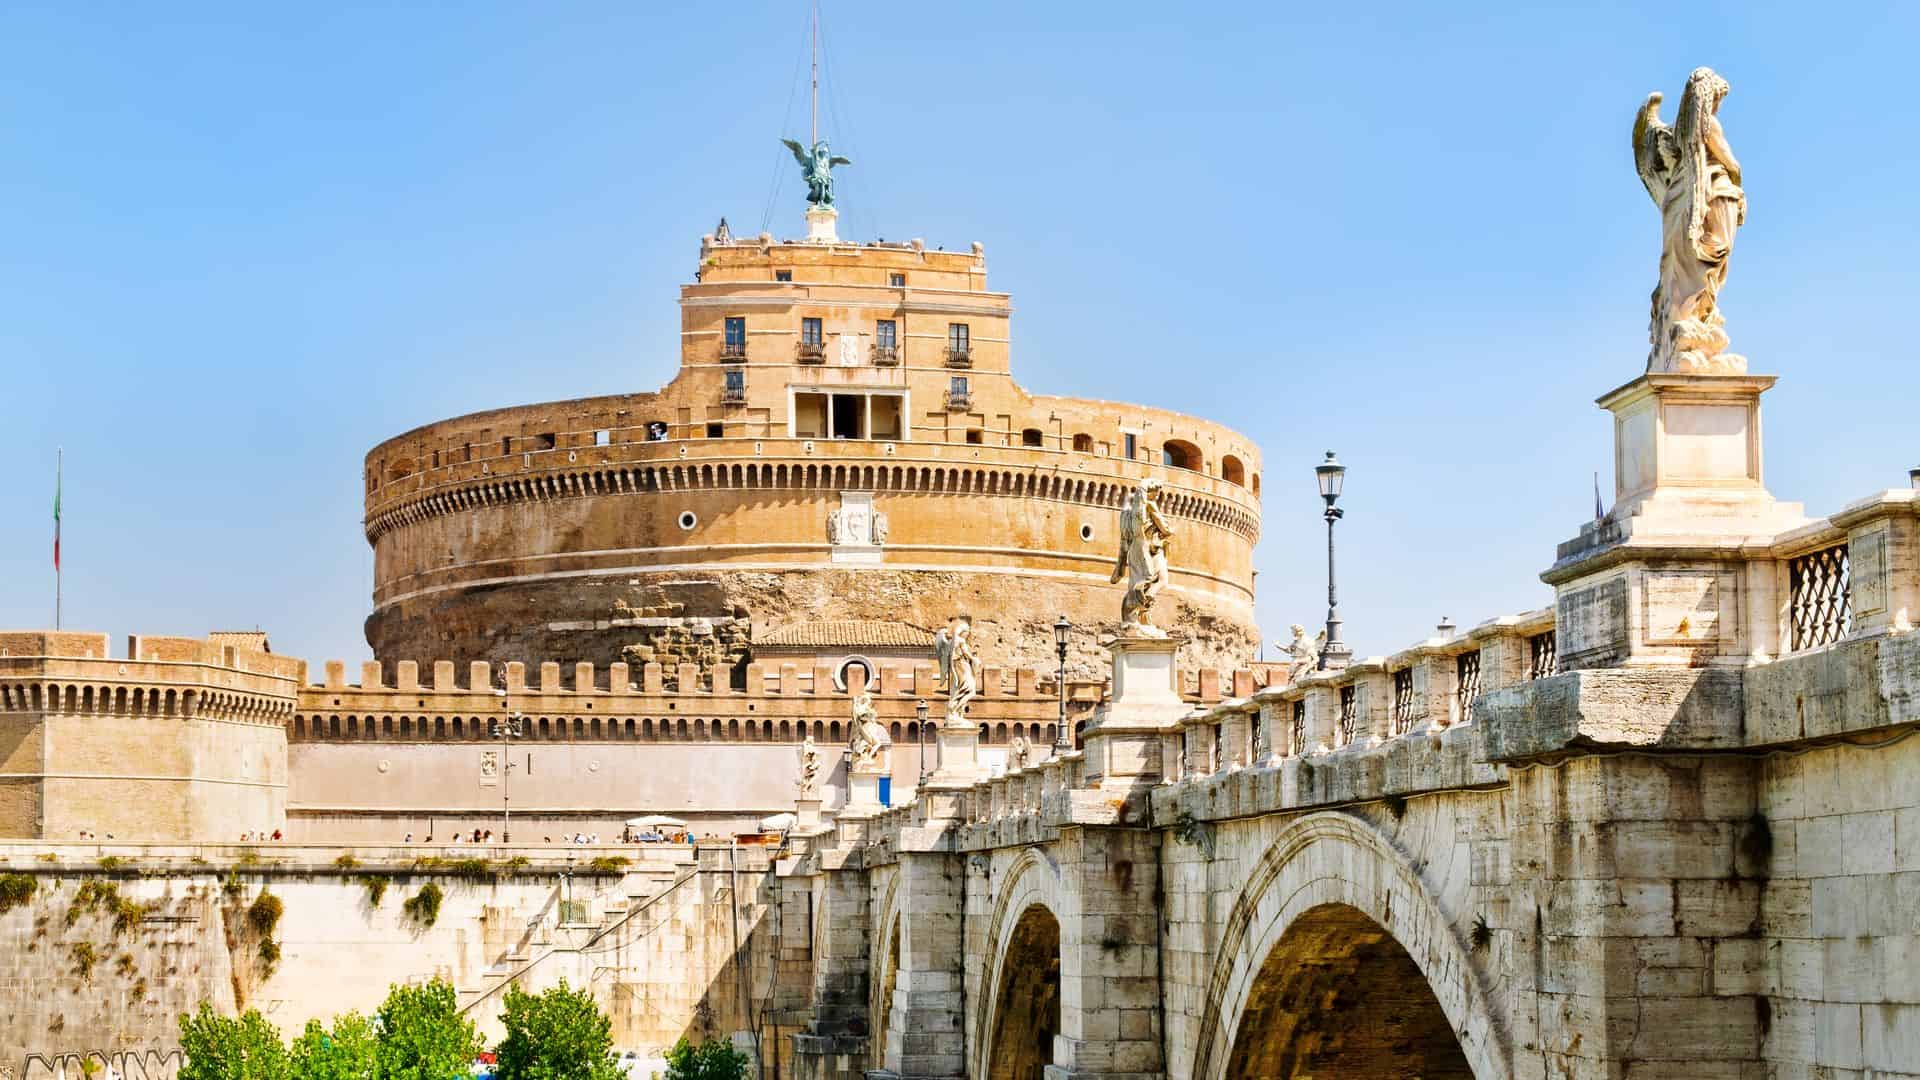 A view of Castel Sant'Angelo from the St. Angelo Bridge.